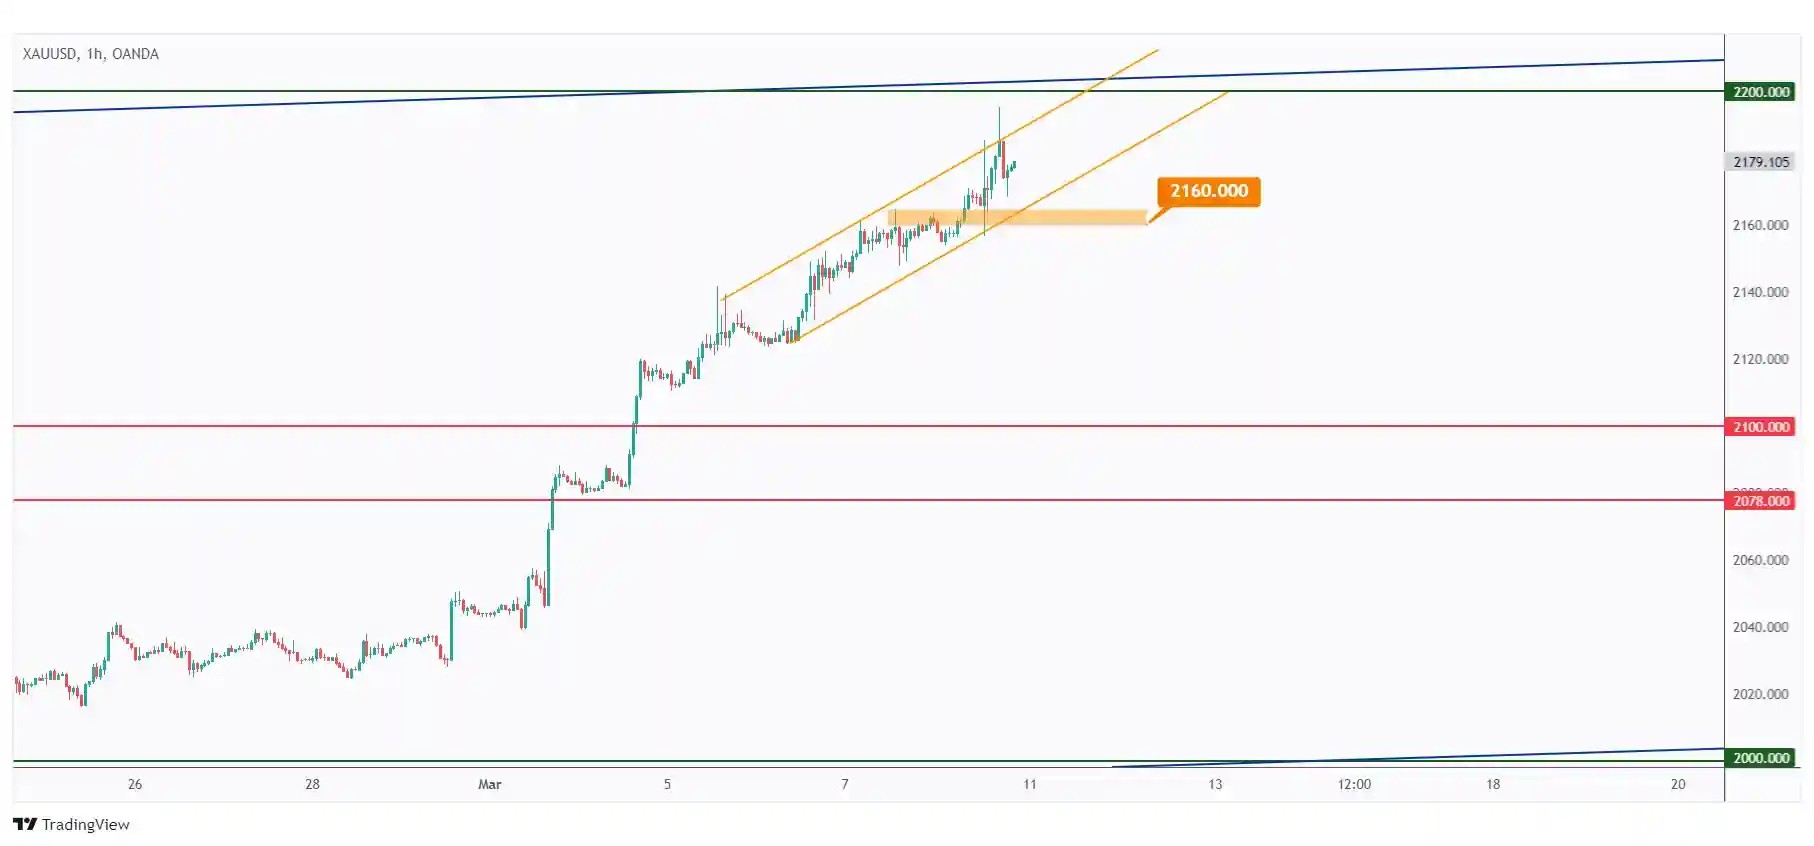 GOLD 1h chart showing the overall bullish sentiment as long as the $2160 holds.